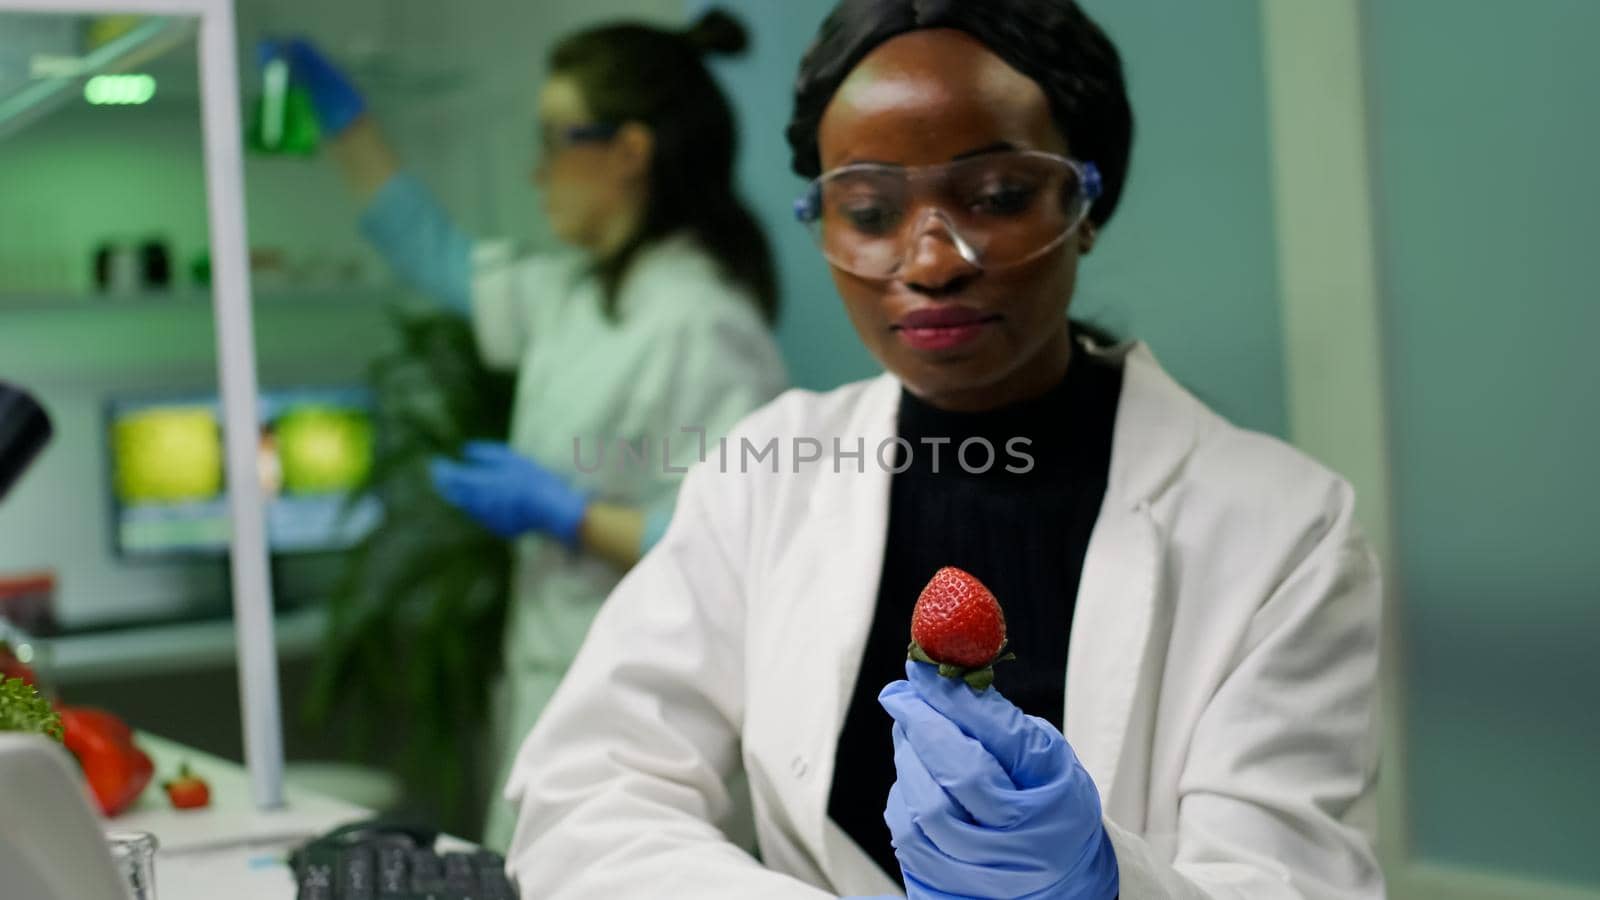 African chemist with medical glasses looking at strawberry injected with chemical pesticides by DCStudio